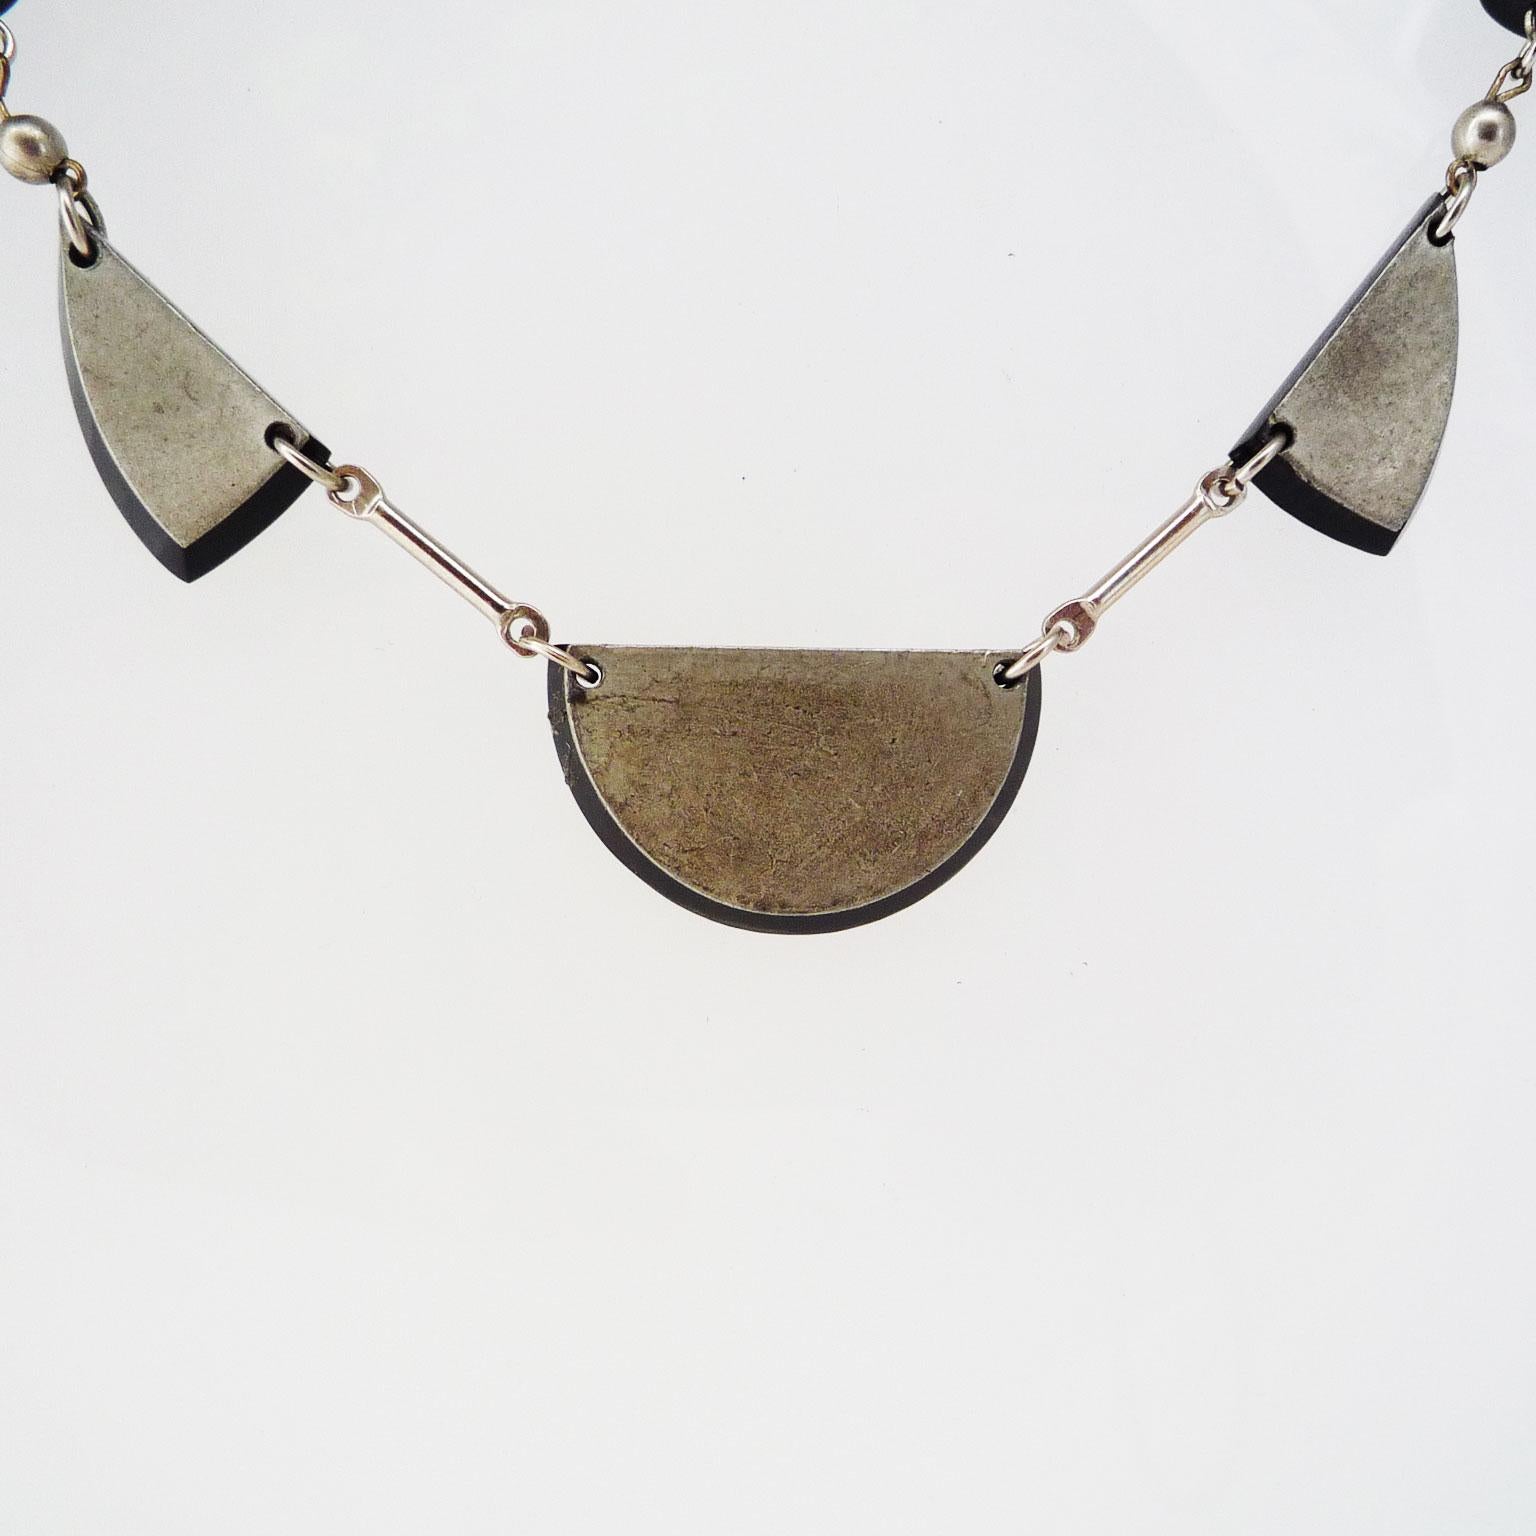 Collier in Chrome and Galalith by Jakob Bengel, around 1920/30 (Art déco)